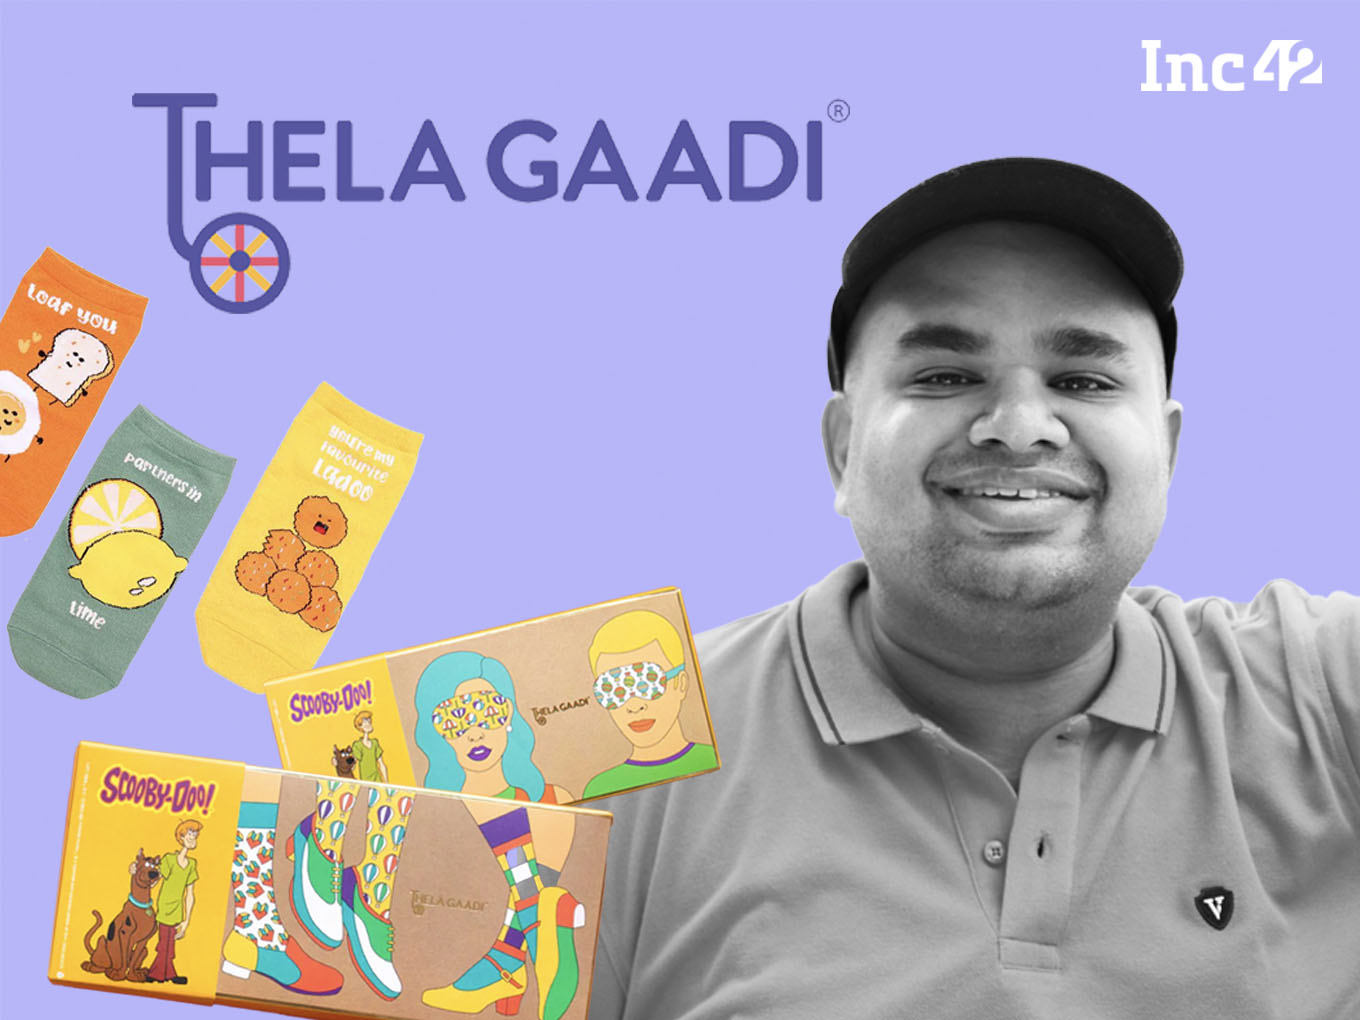 Betting Big On Nostalgia, D2C Socks Brand Thela Gaadi Aims To Double Its Revenue FY24